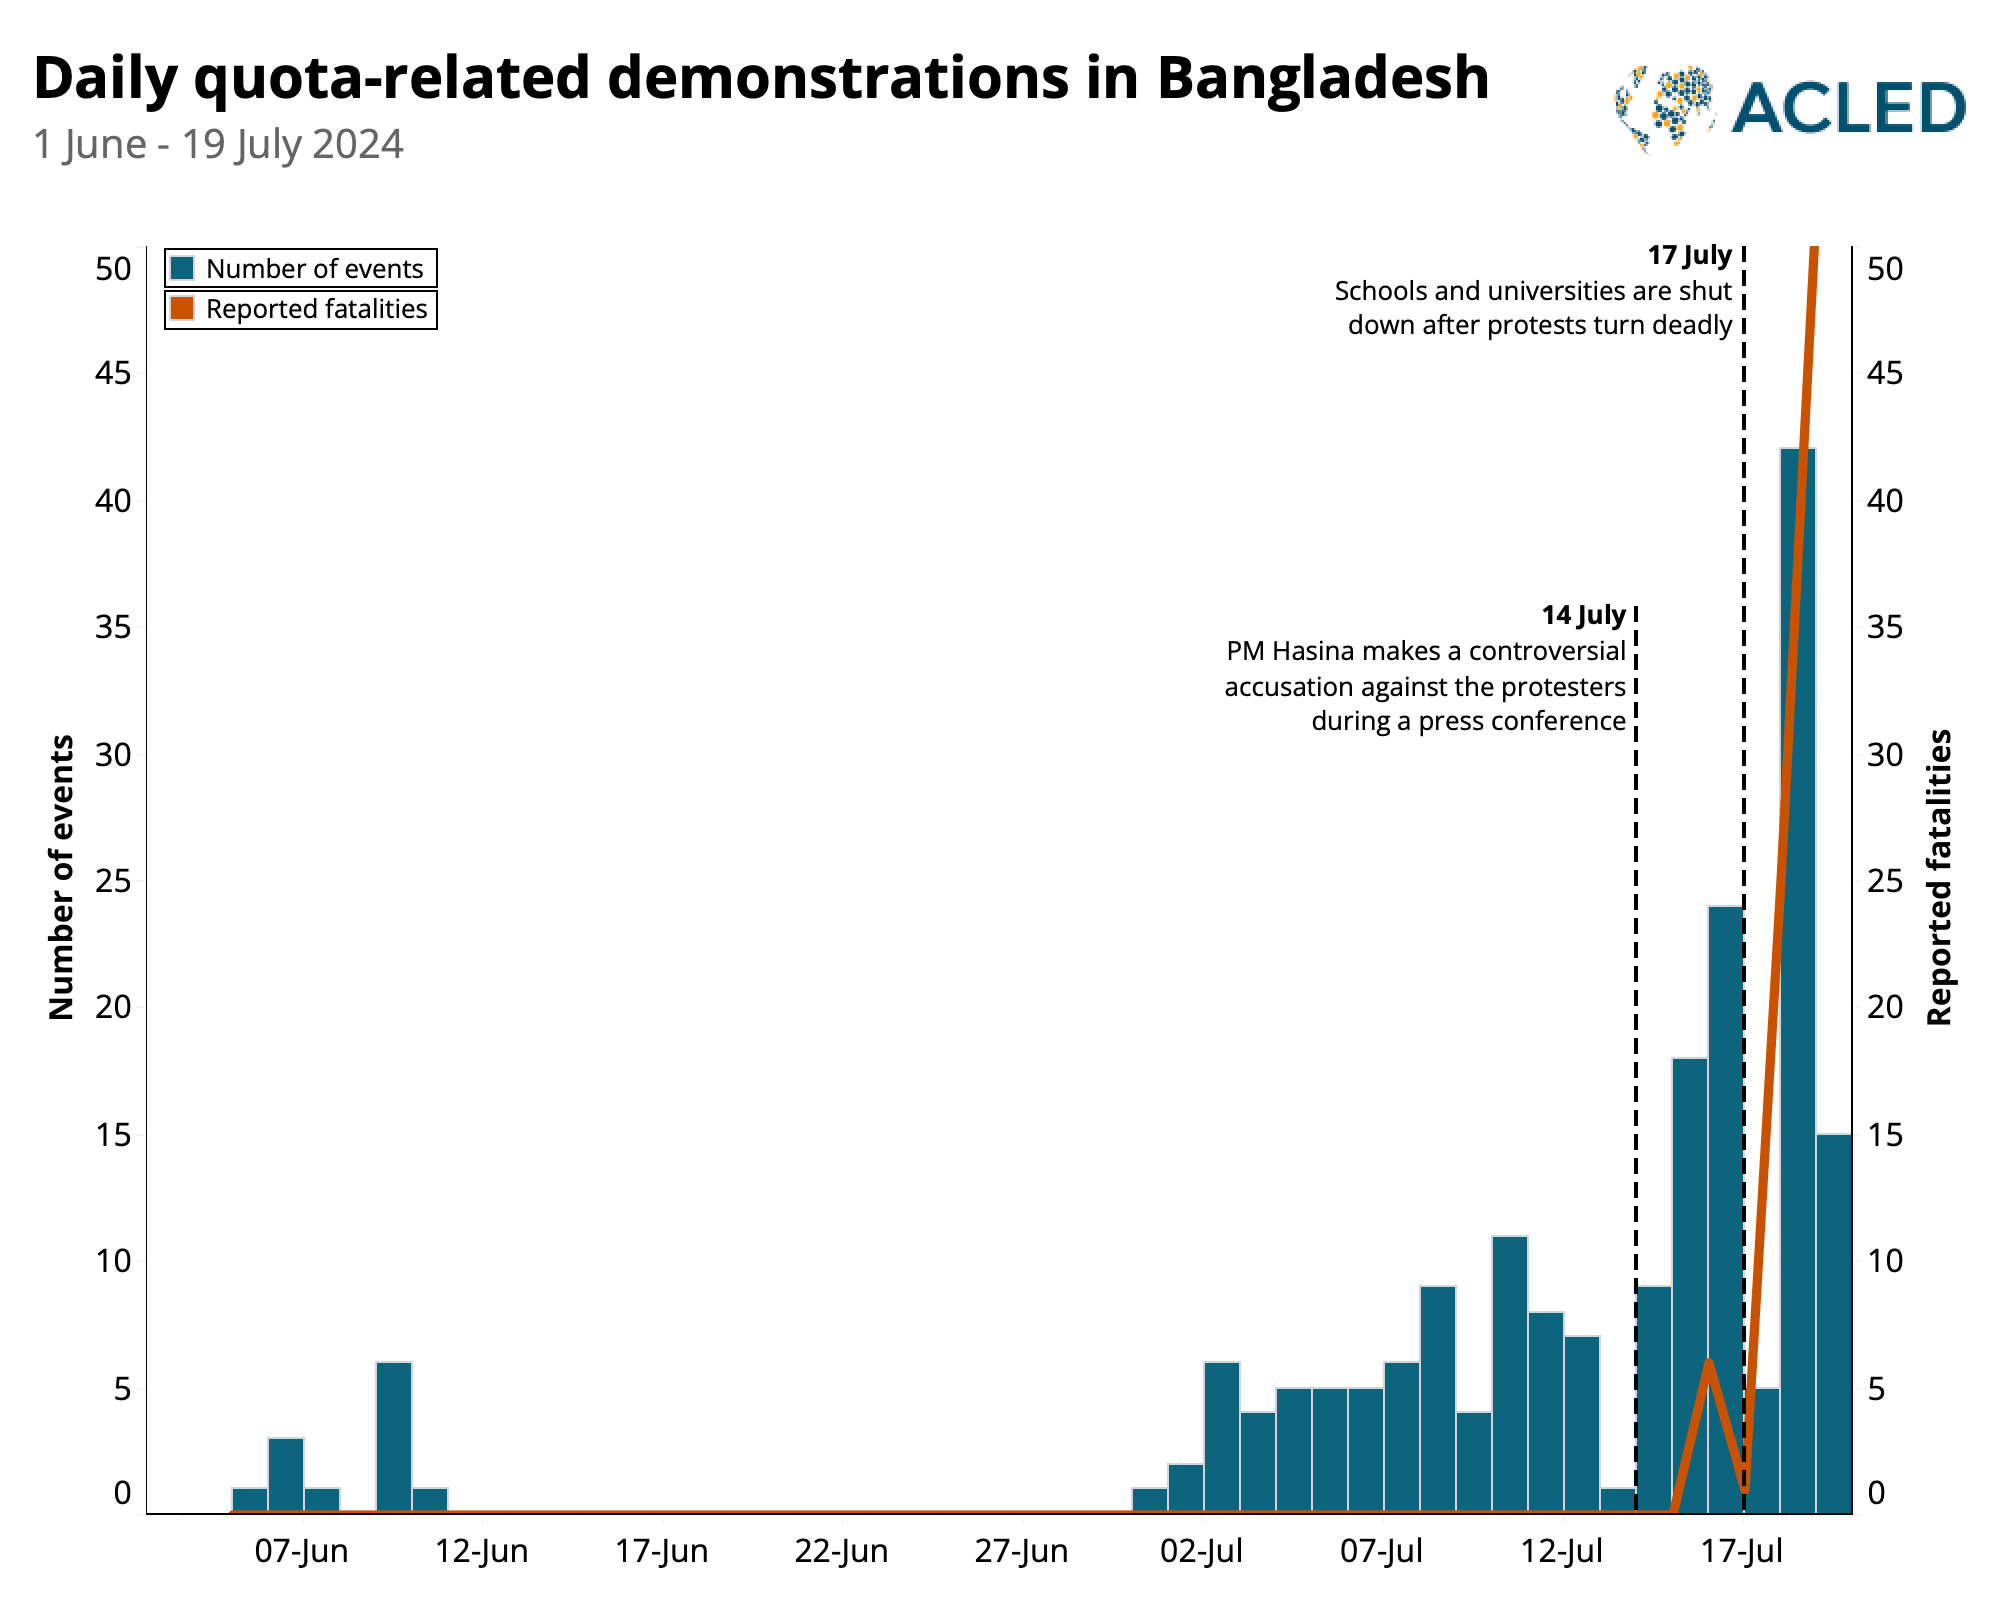 Chart showing daily quote related demonstrations in bangladesh, June-July 2024